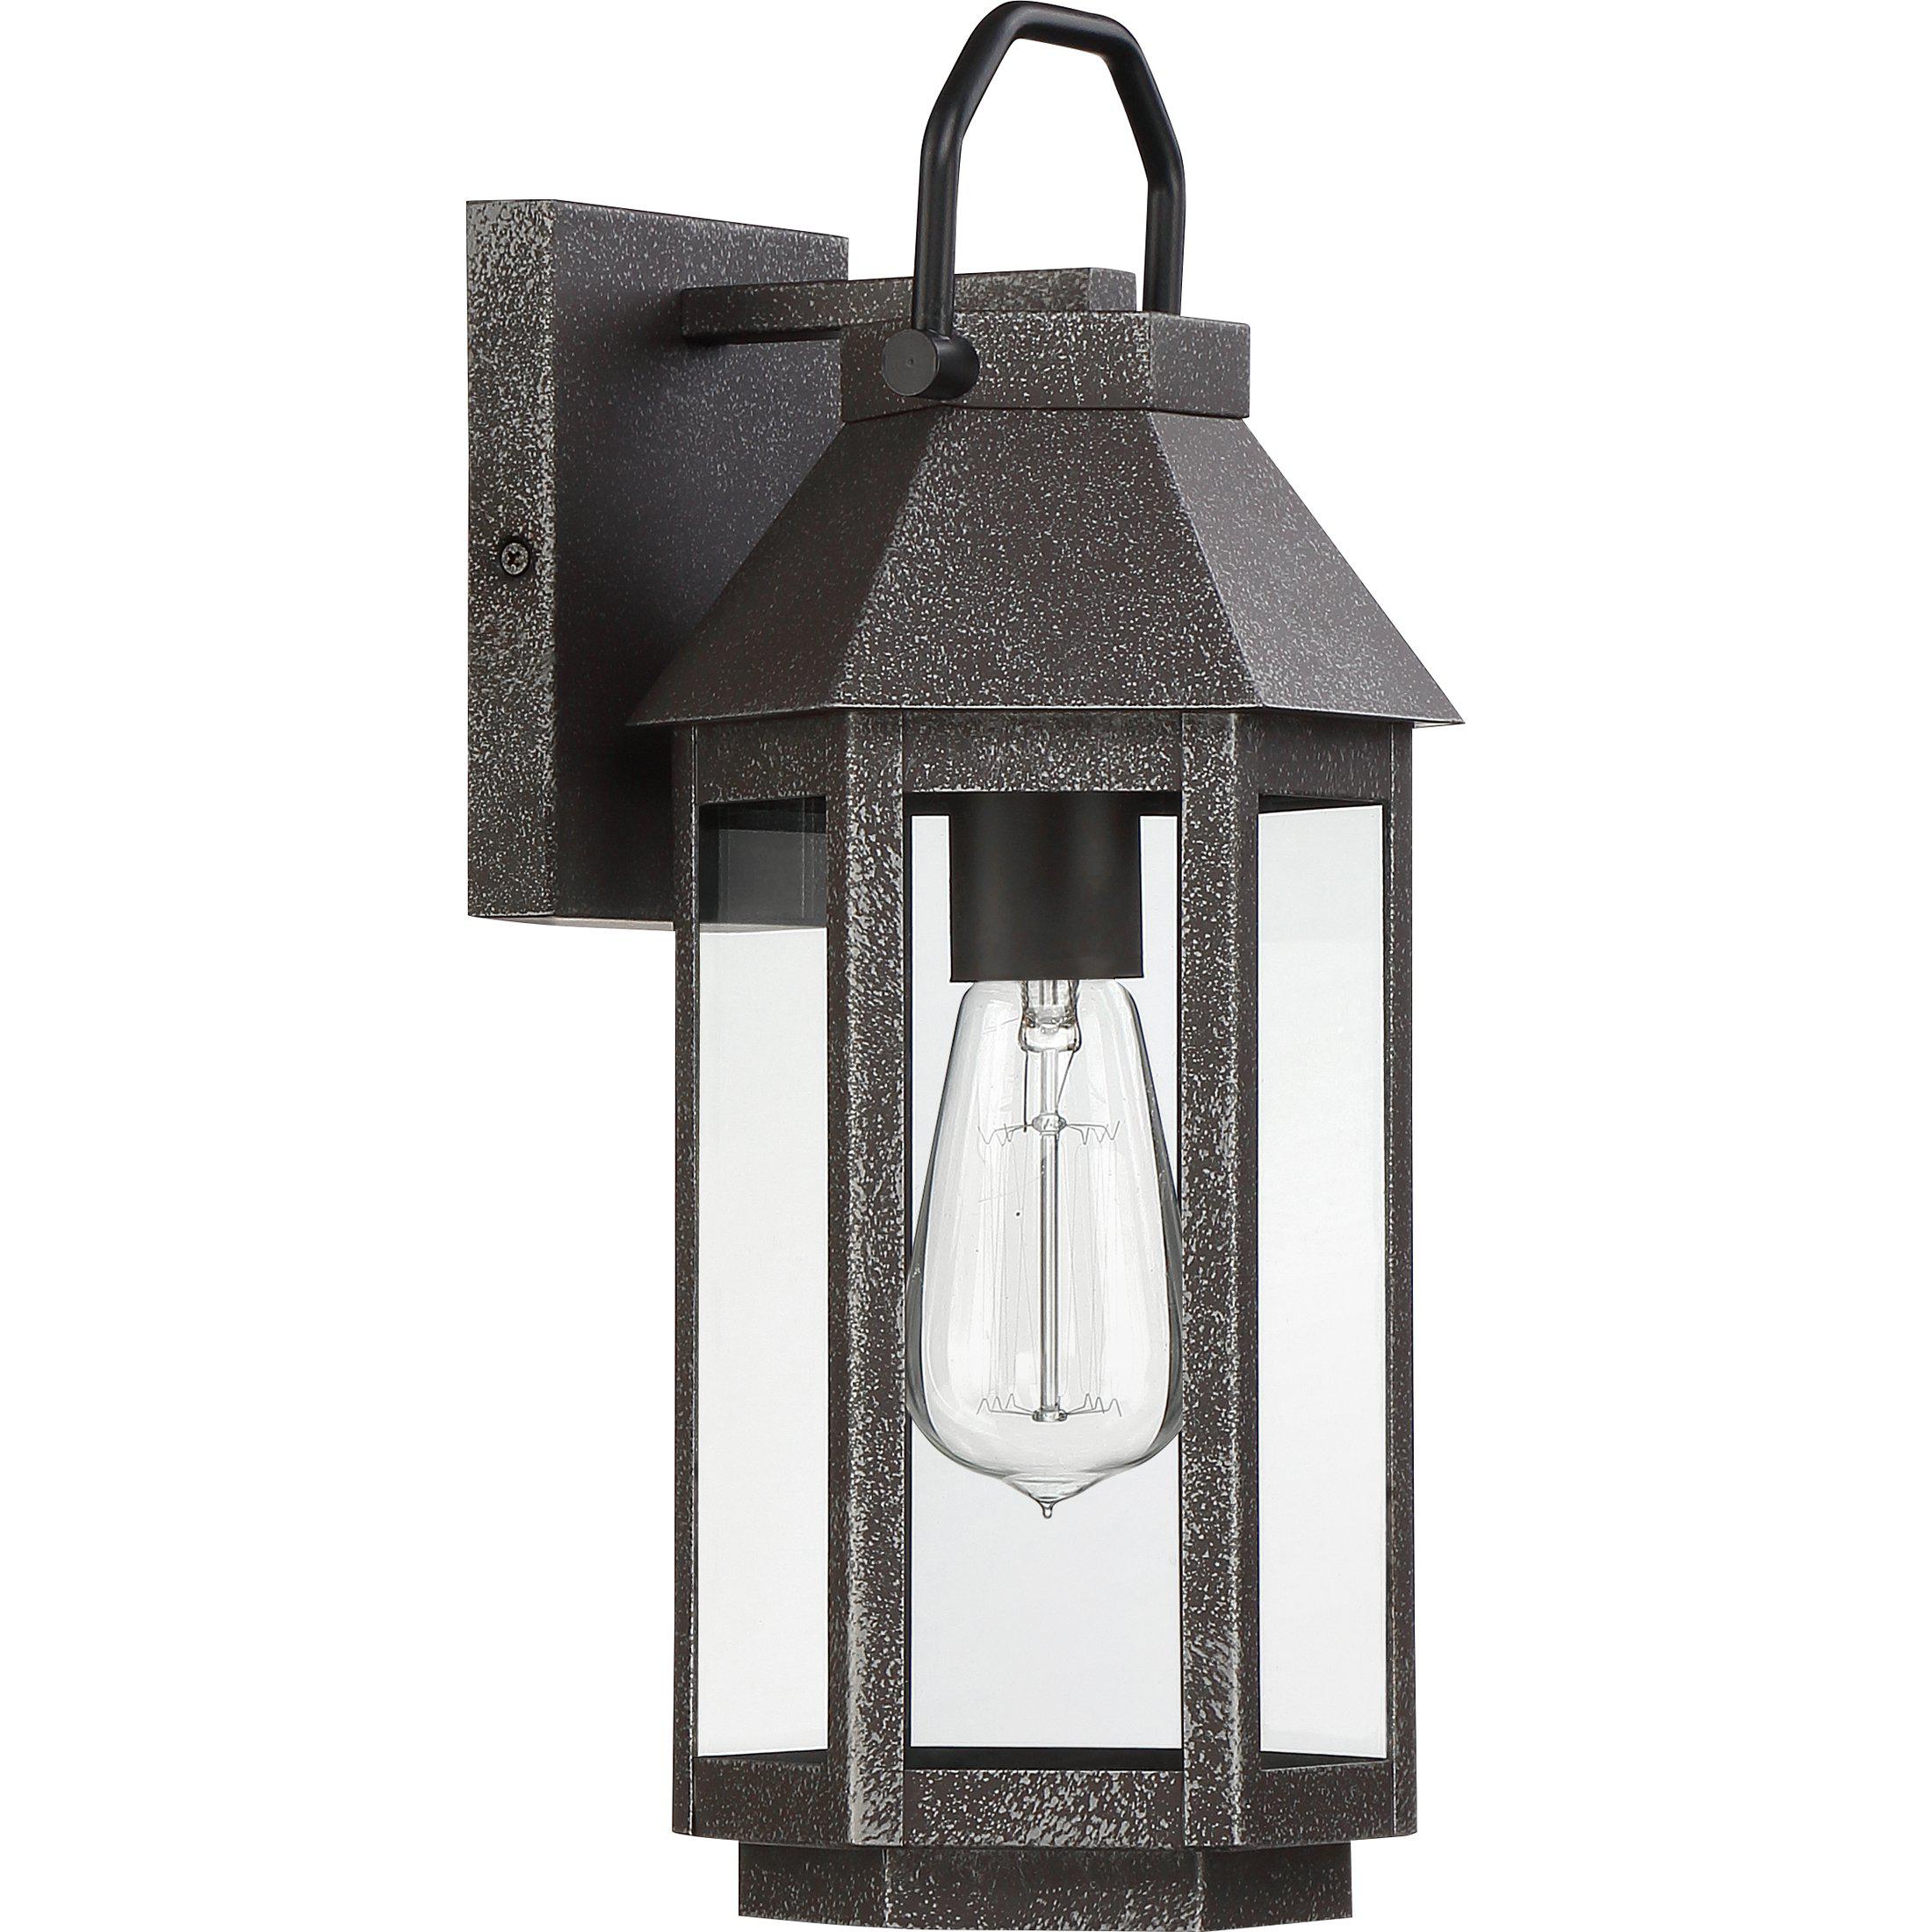 Quoizel  Campbell Outdoor Lantern, Small Outdoor l Wall Quoizel   